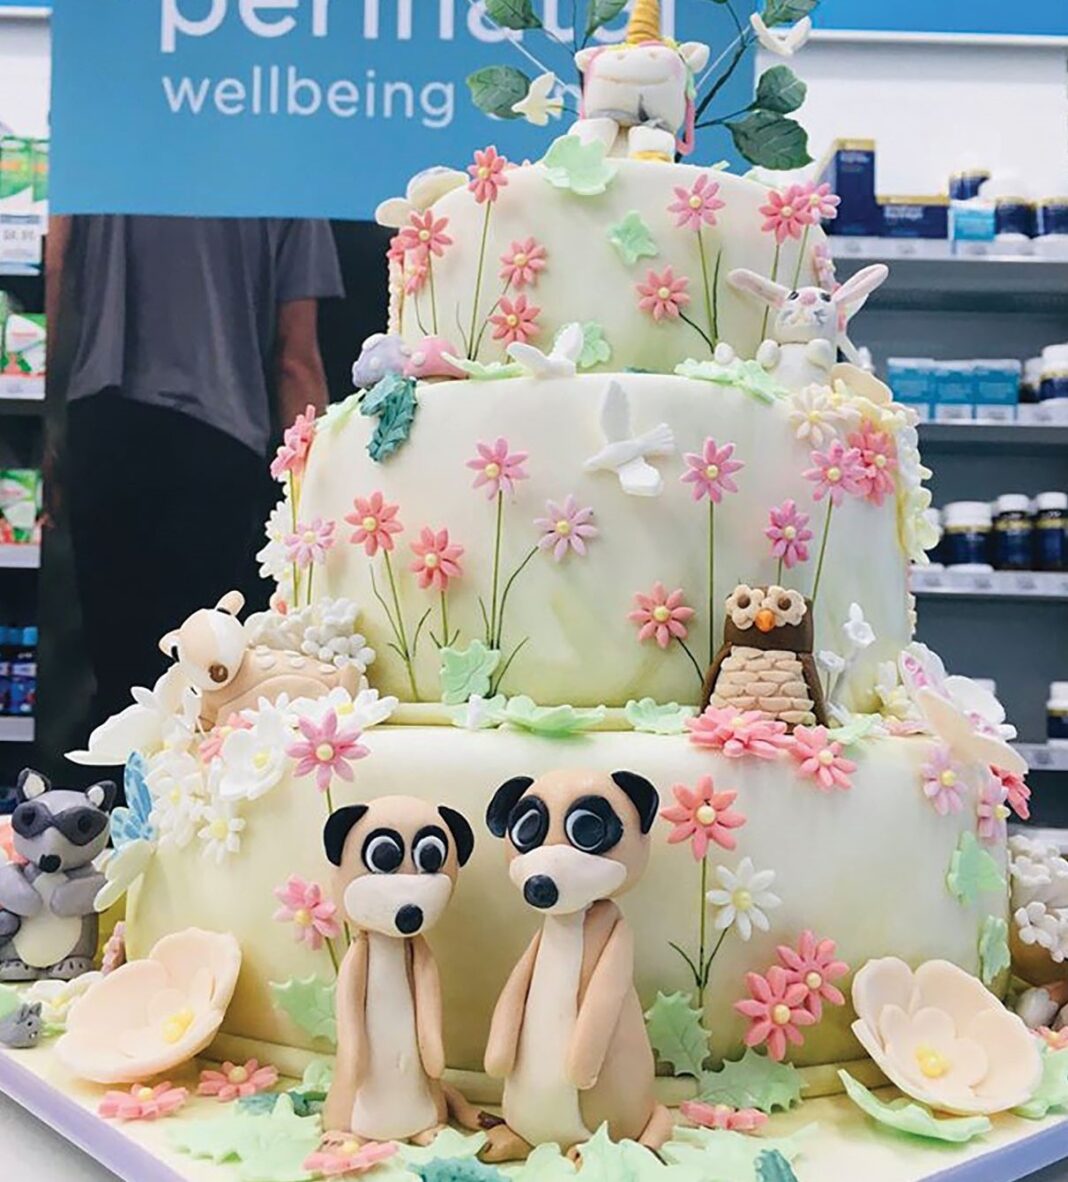 large cake with animals made out of cake on it